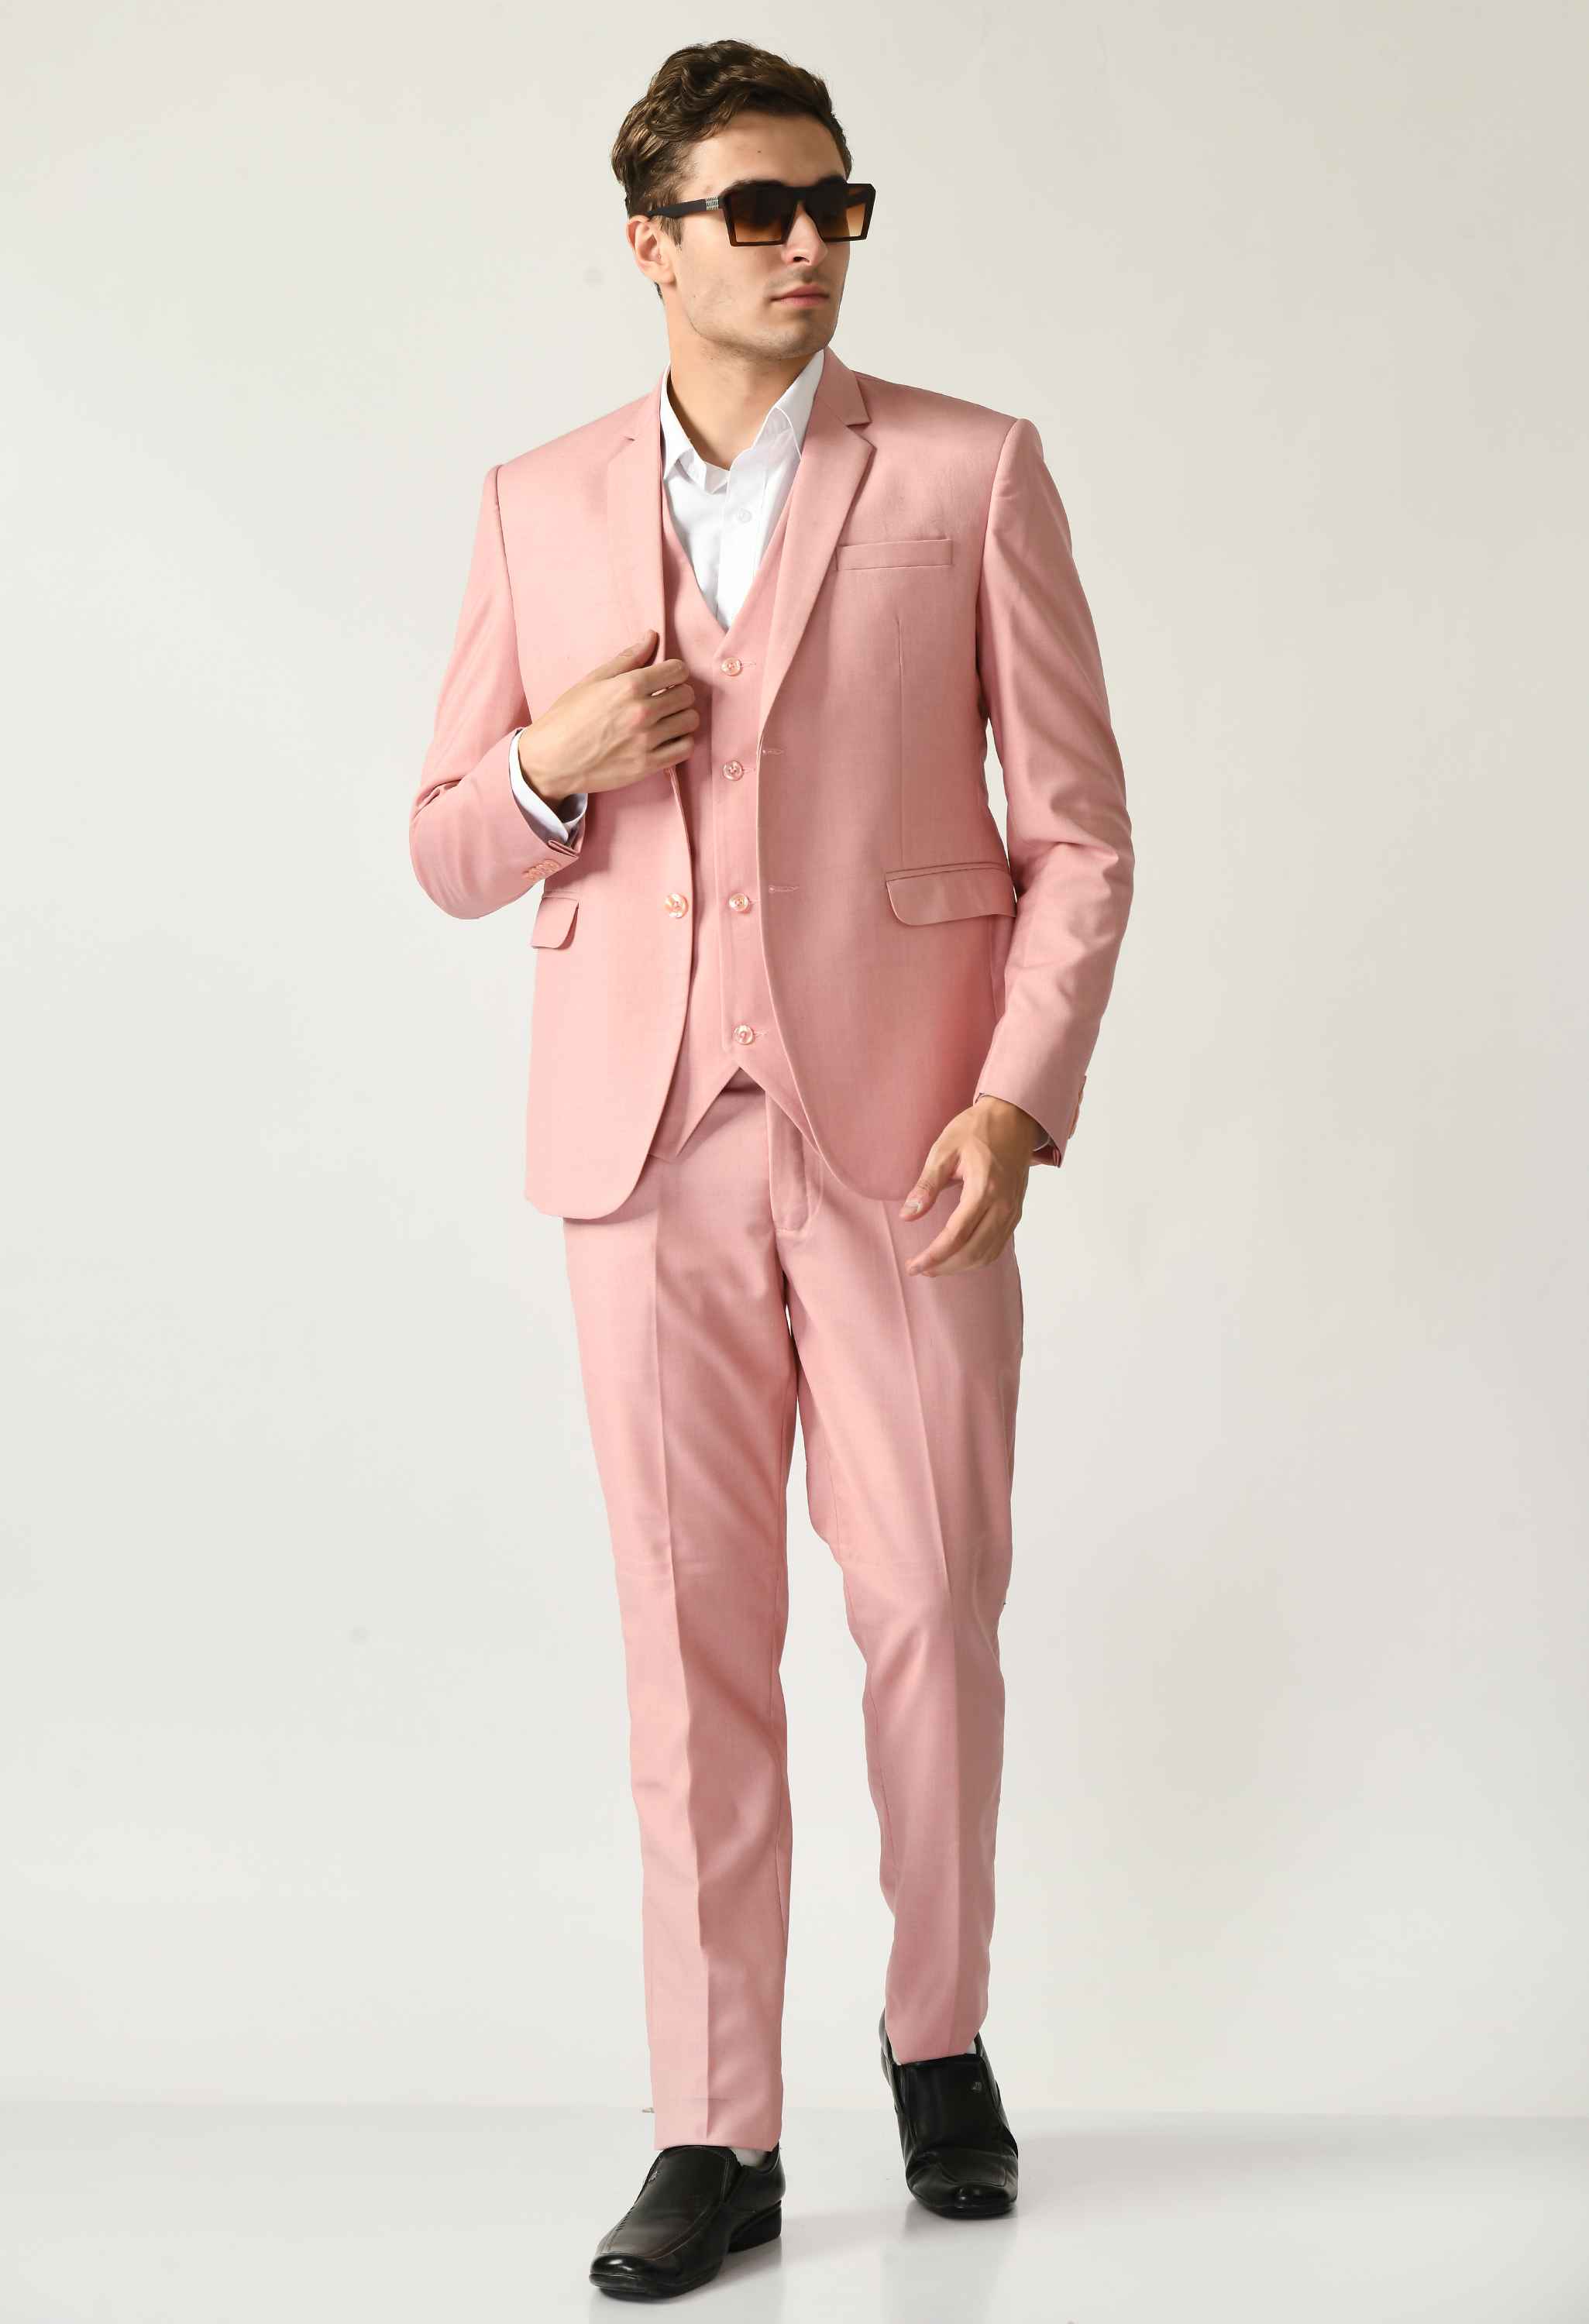 Party Pink Suit Outfit